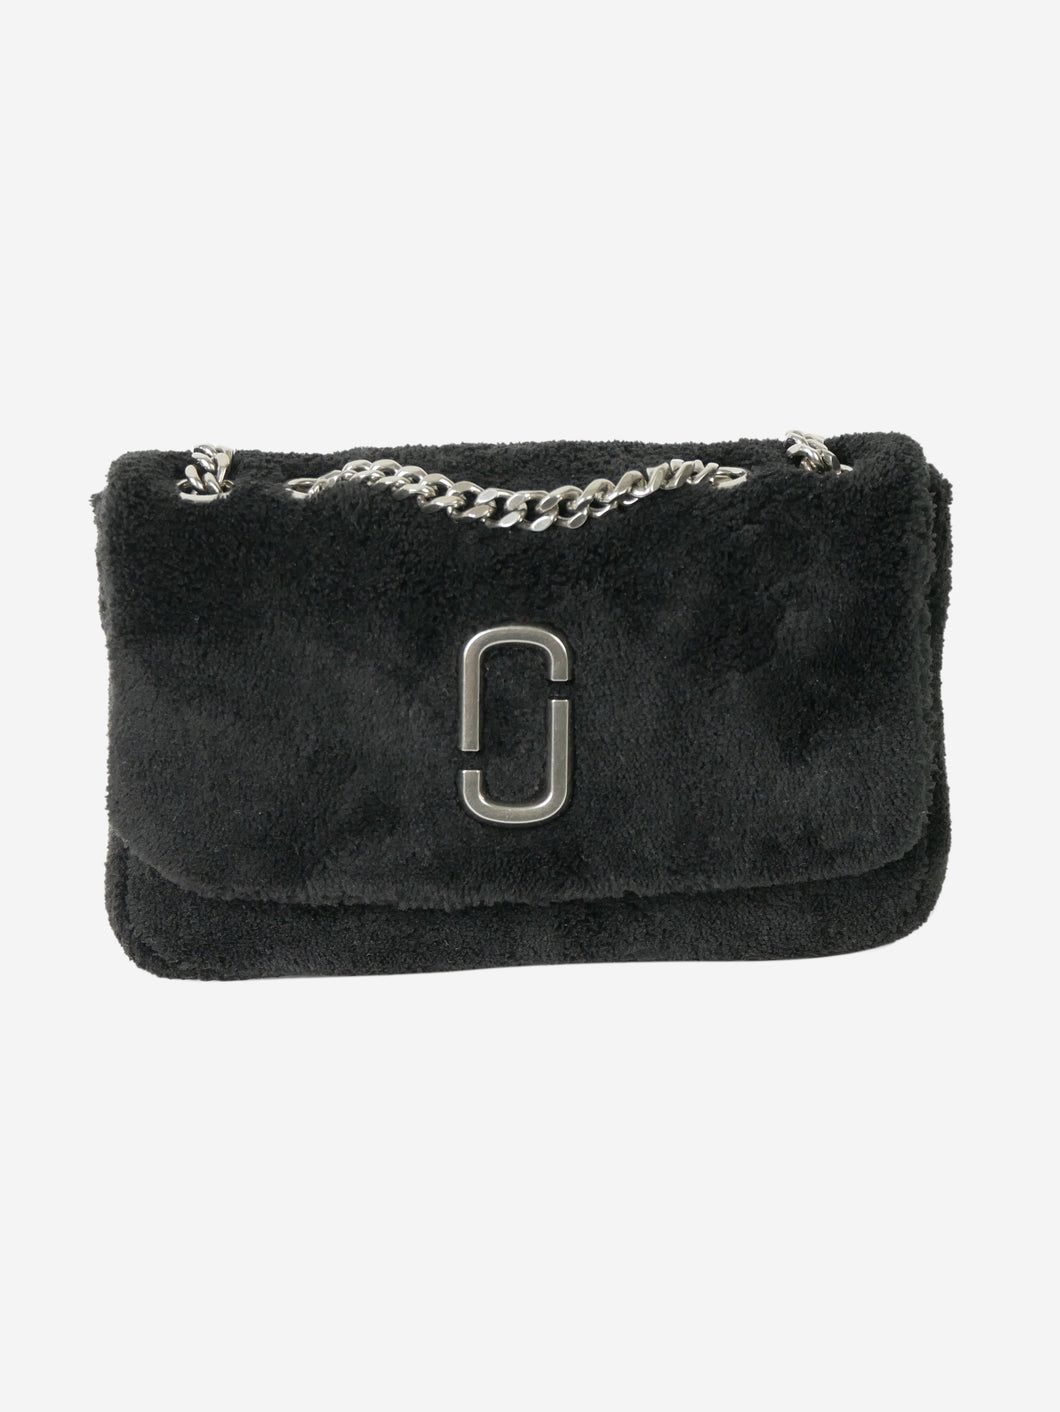 Black cross-body bag with silver-toned chain Cross-body bags Marc Jacobs 